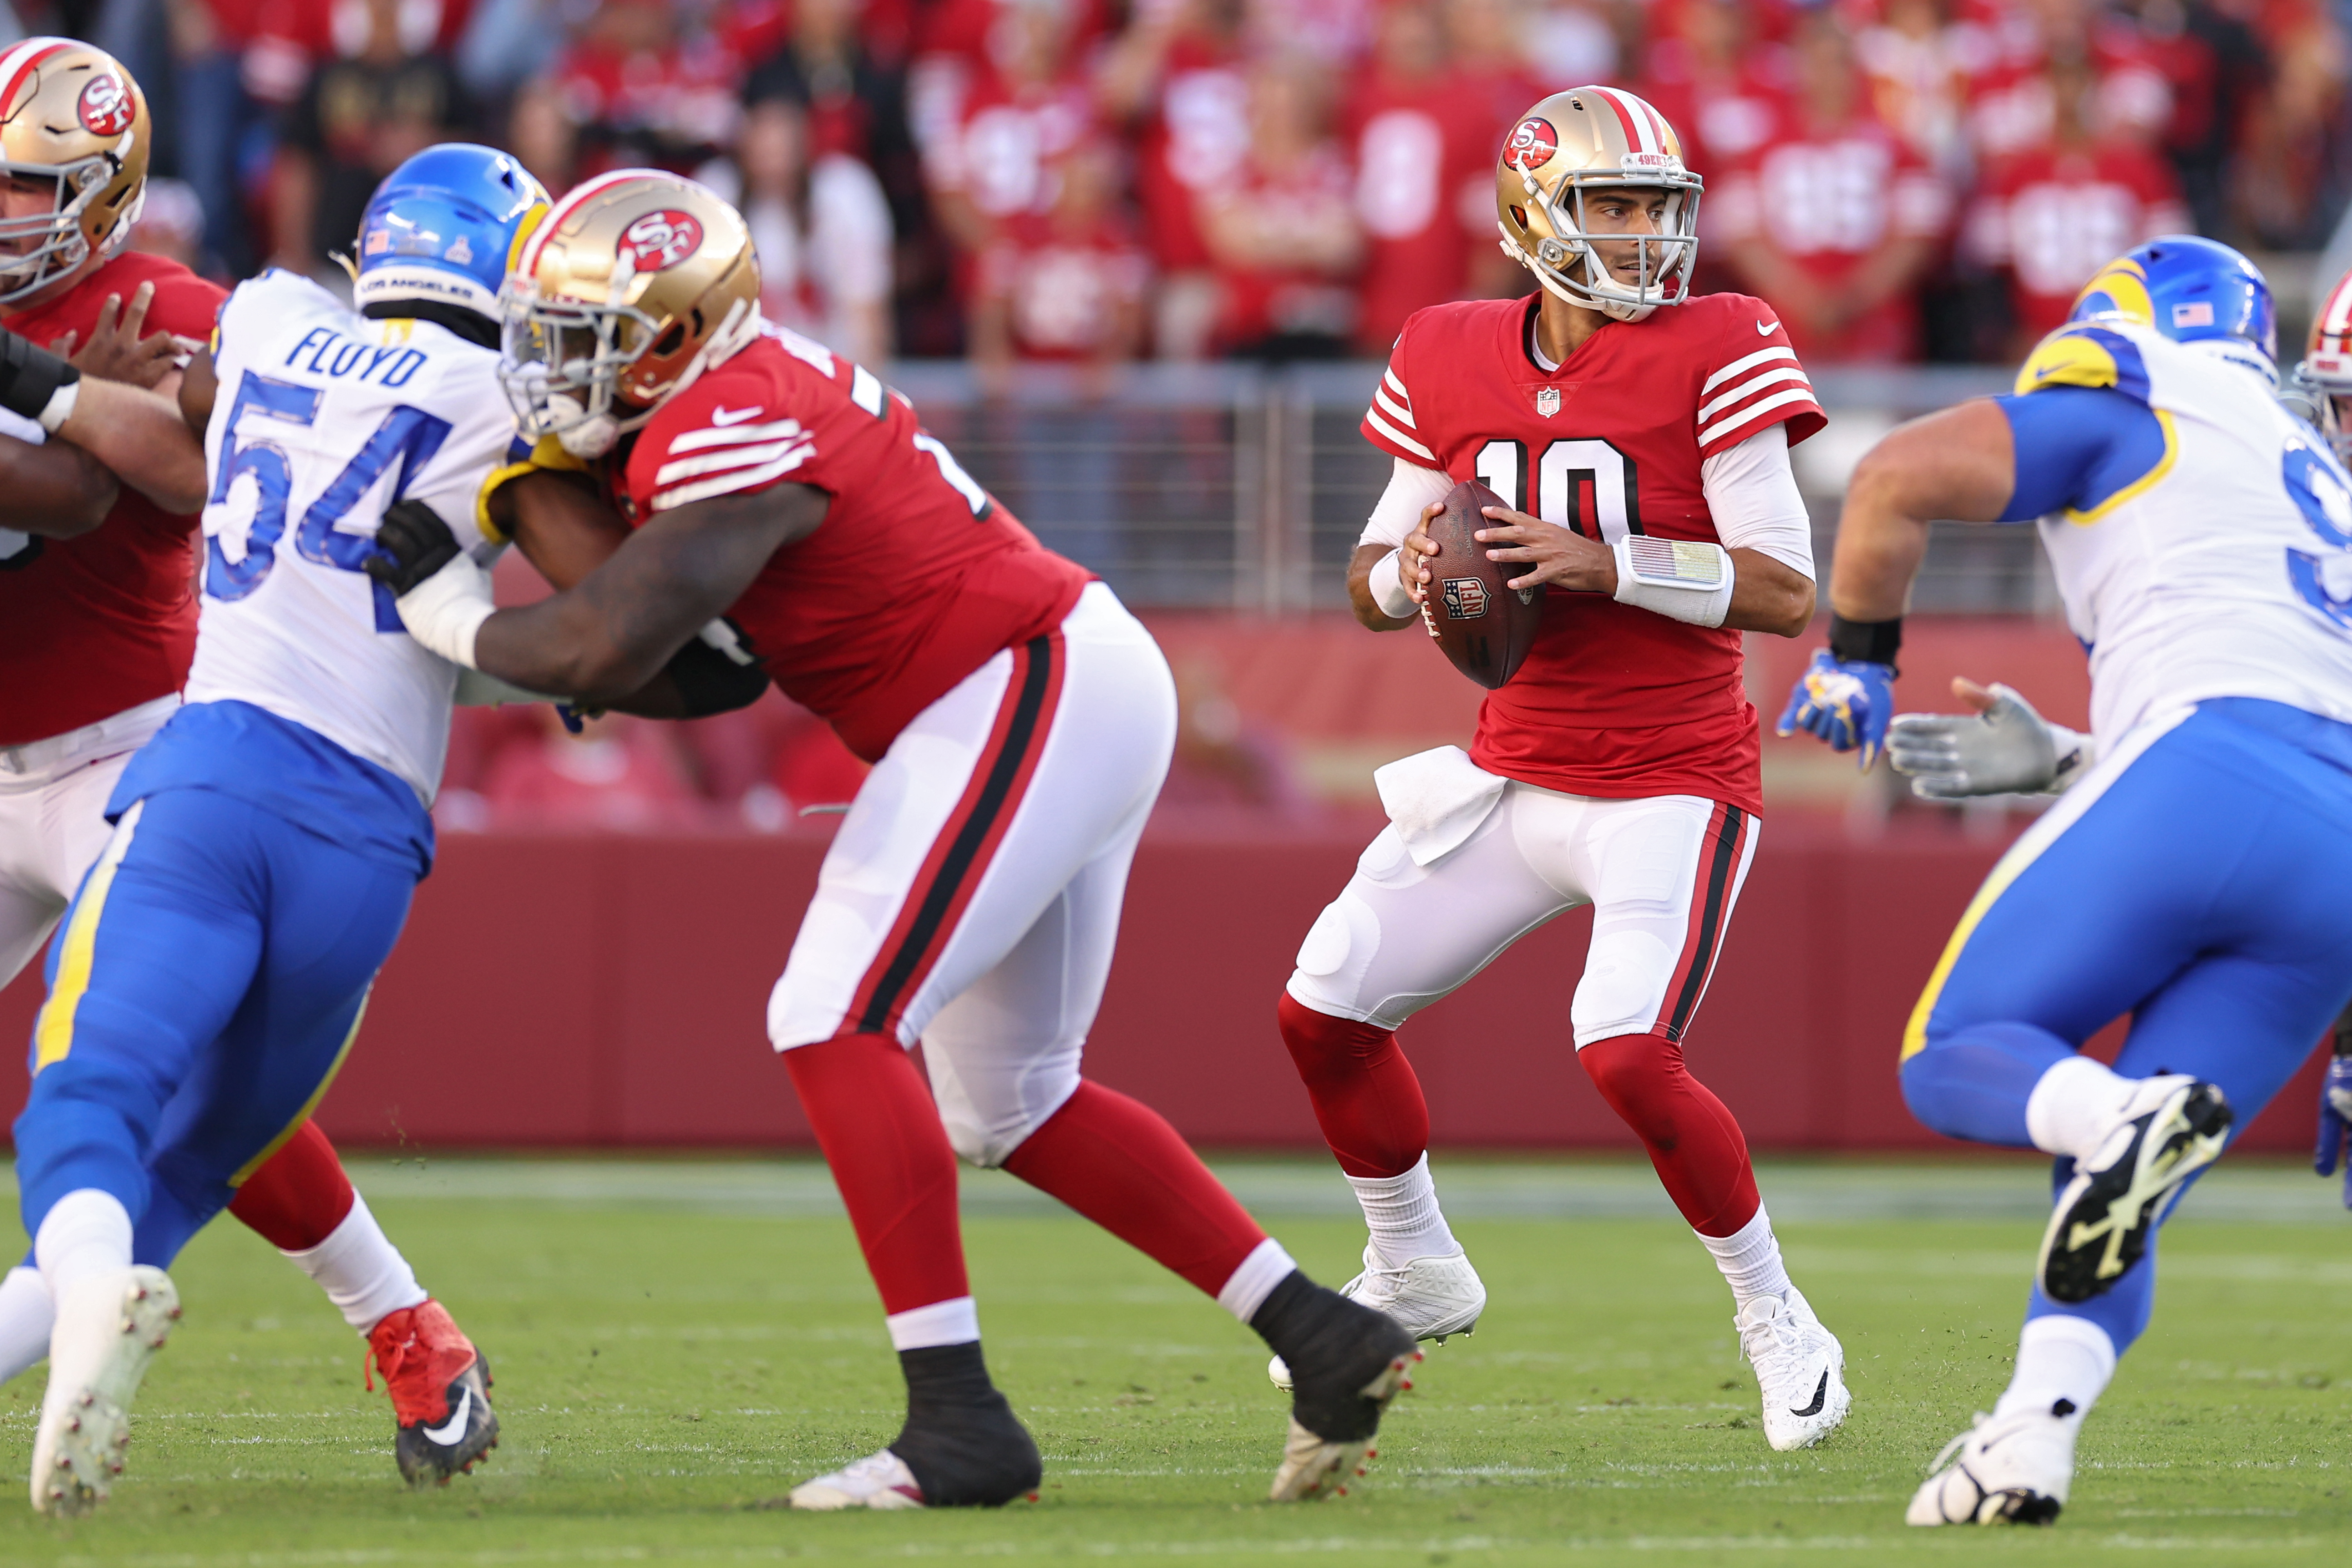 Quarterback Jimmy Garoppolo (#10) of the San Francisco 49ers looks to pass in the game against the Los Angeles Rams at Levi's Stadium in Santa Clara, California, October 3, 2022. /CFP